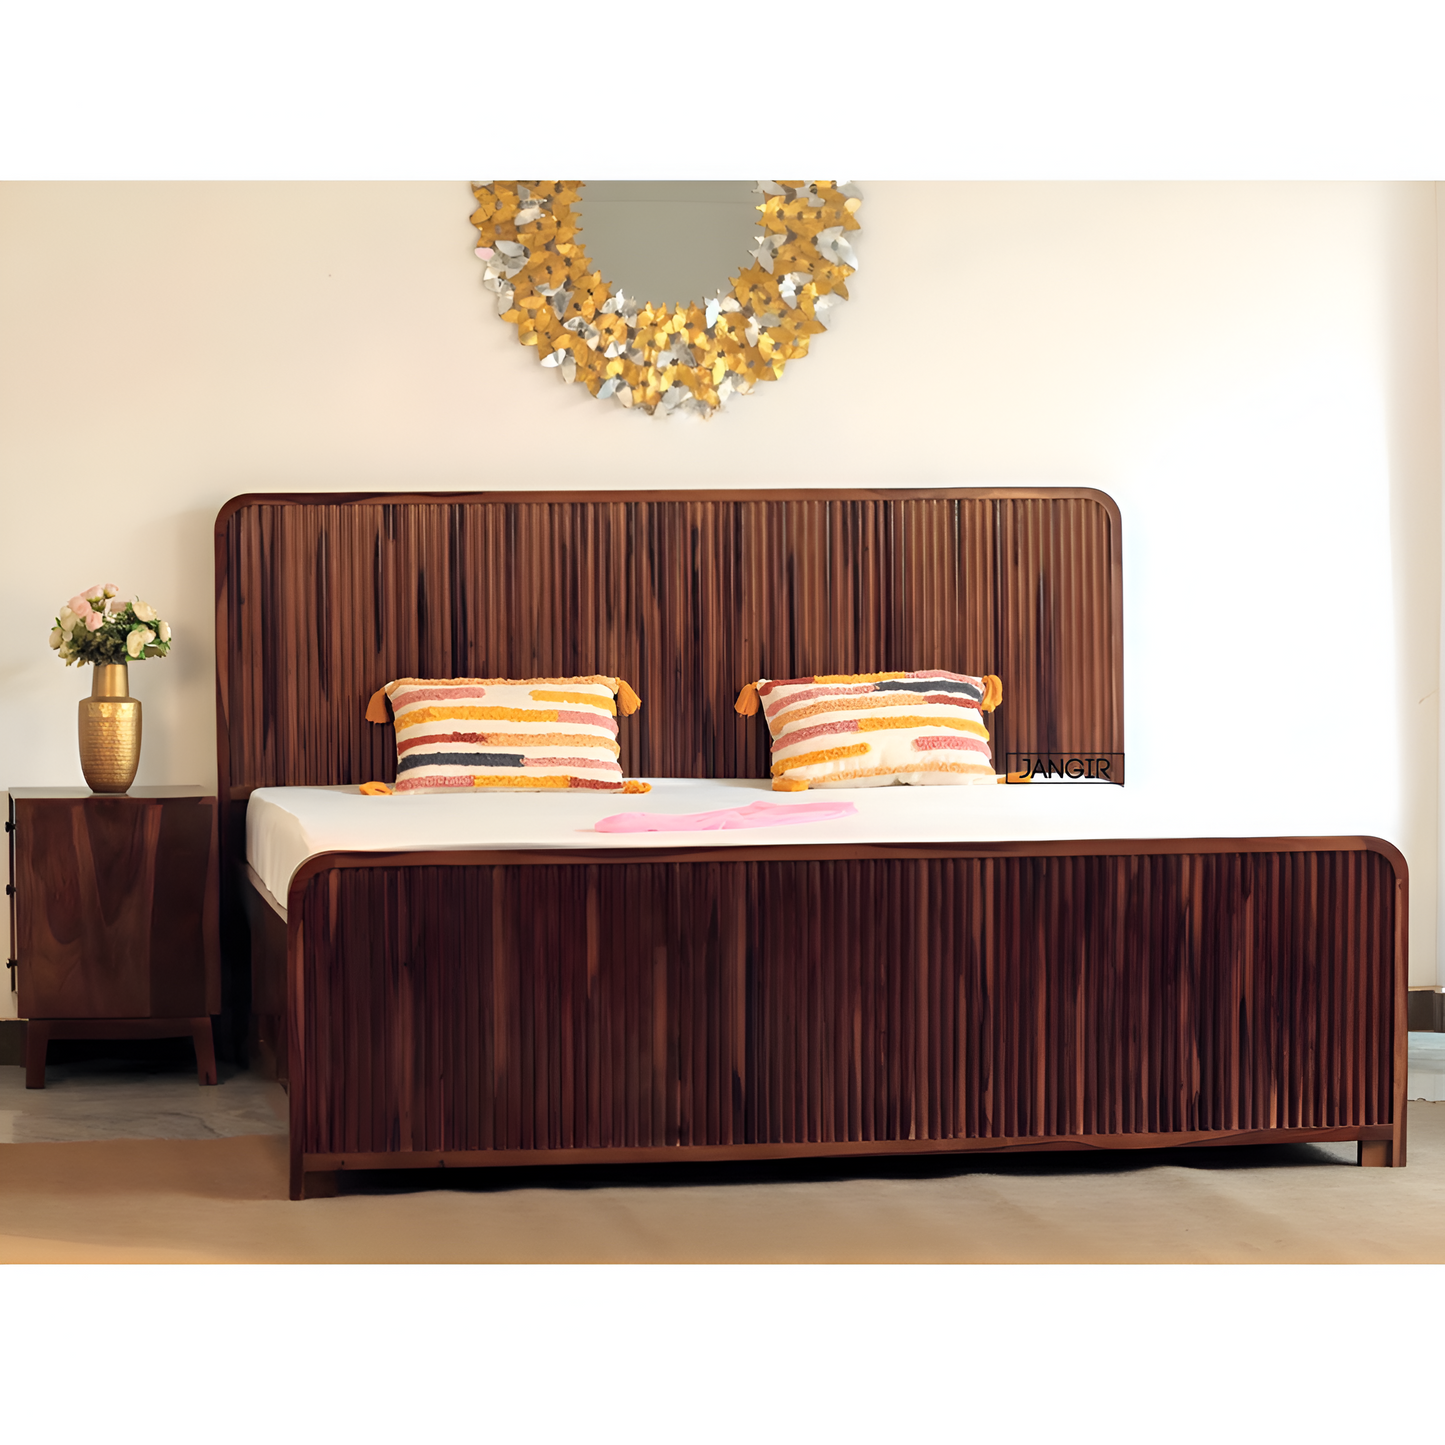 Discover the perfect combination of style and practicality with our stunning storage beds made from sheesham wood. Embrace luxury living - Buy online or visit us in-store today at Bangalore